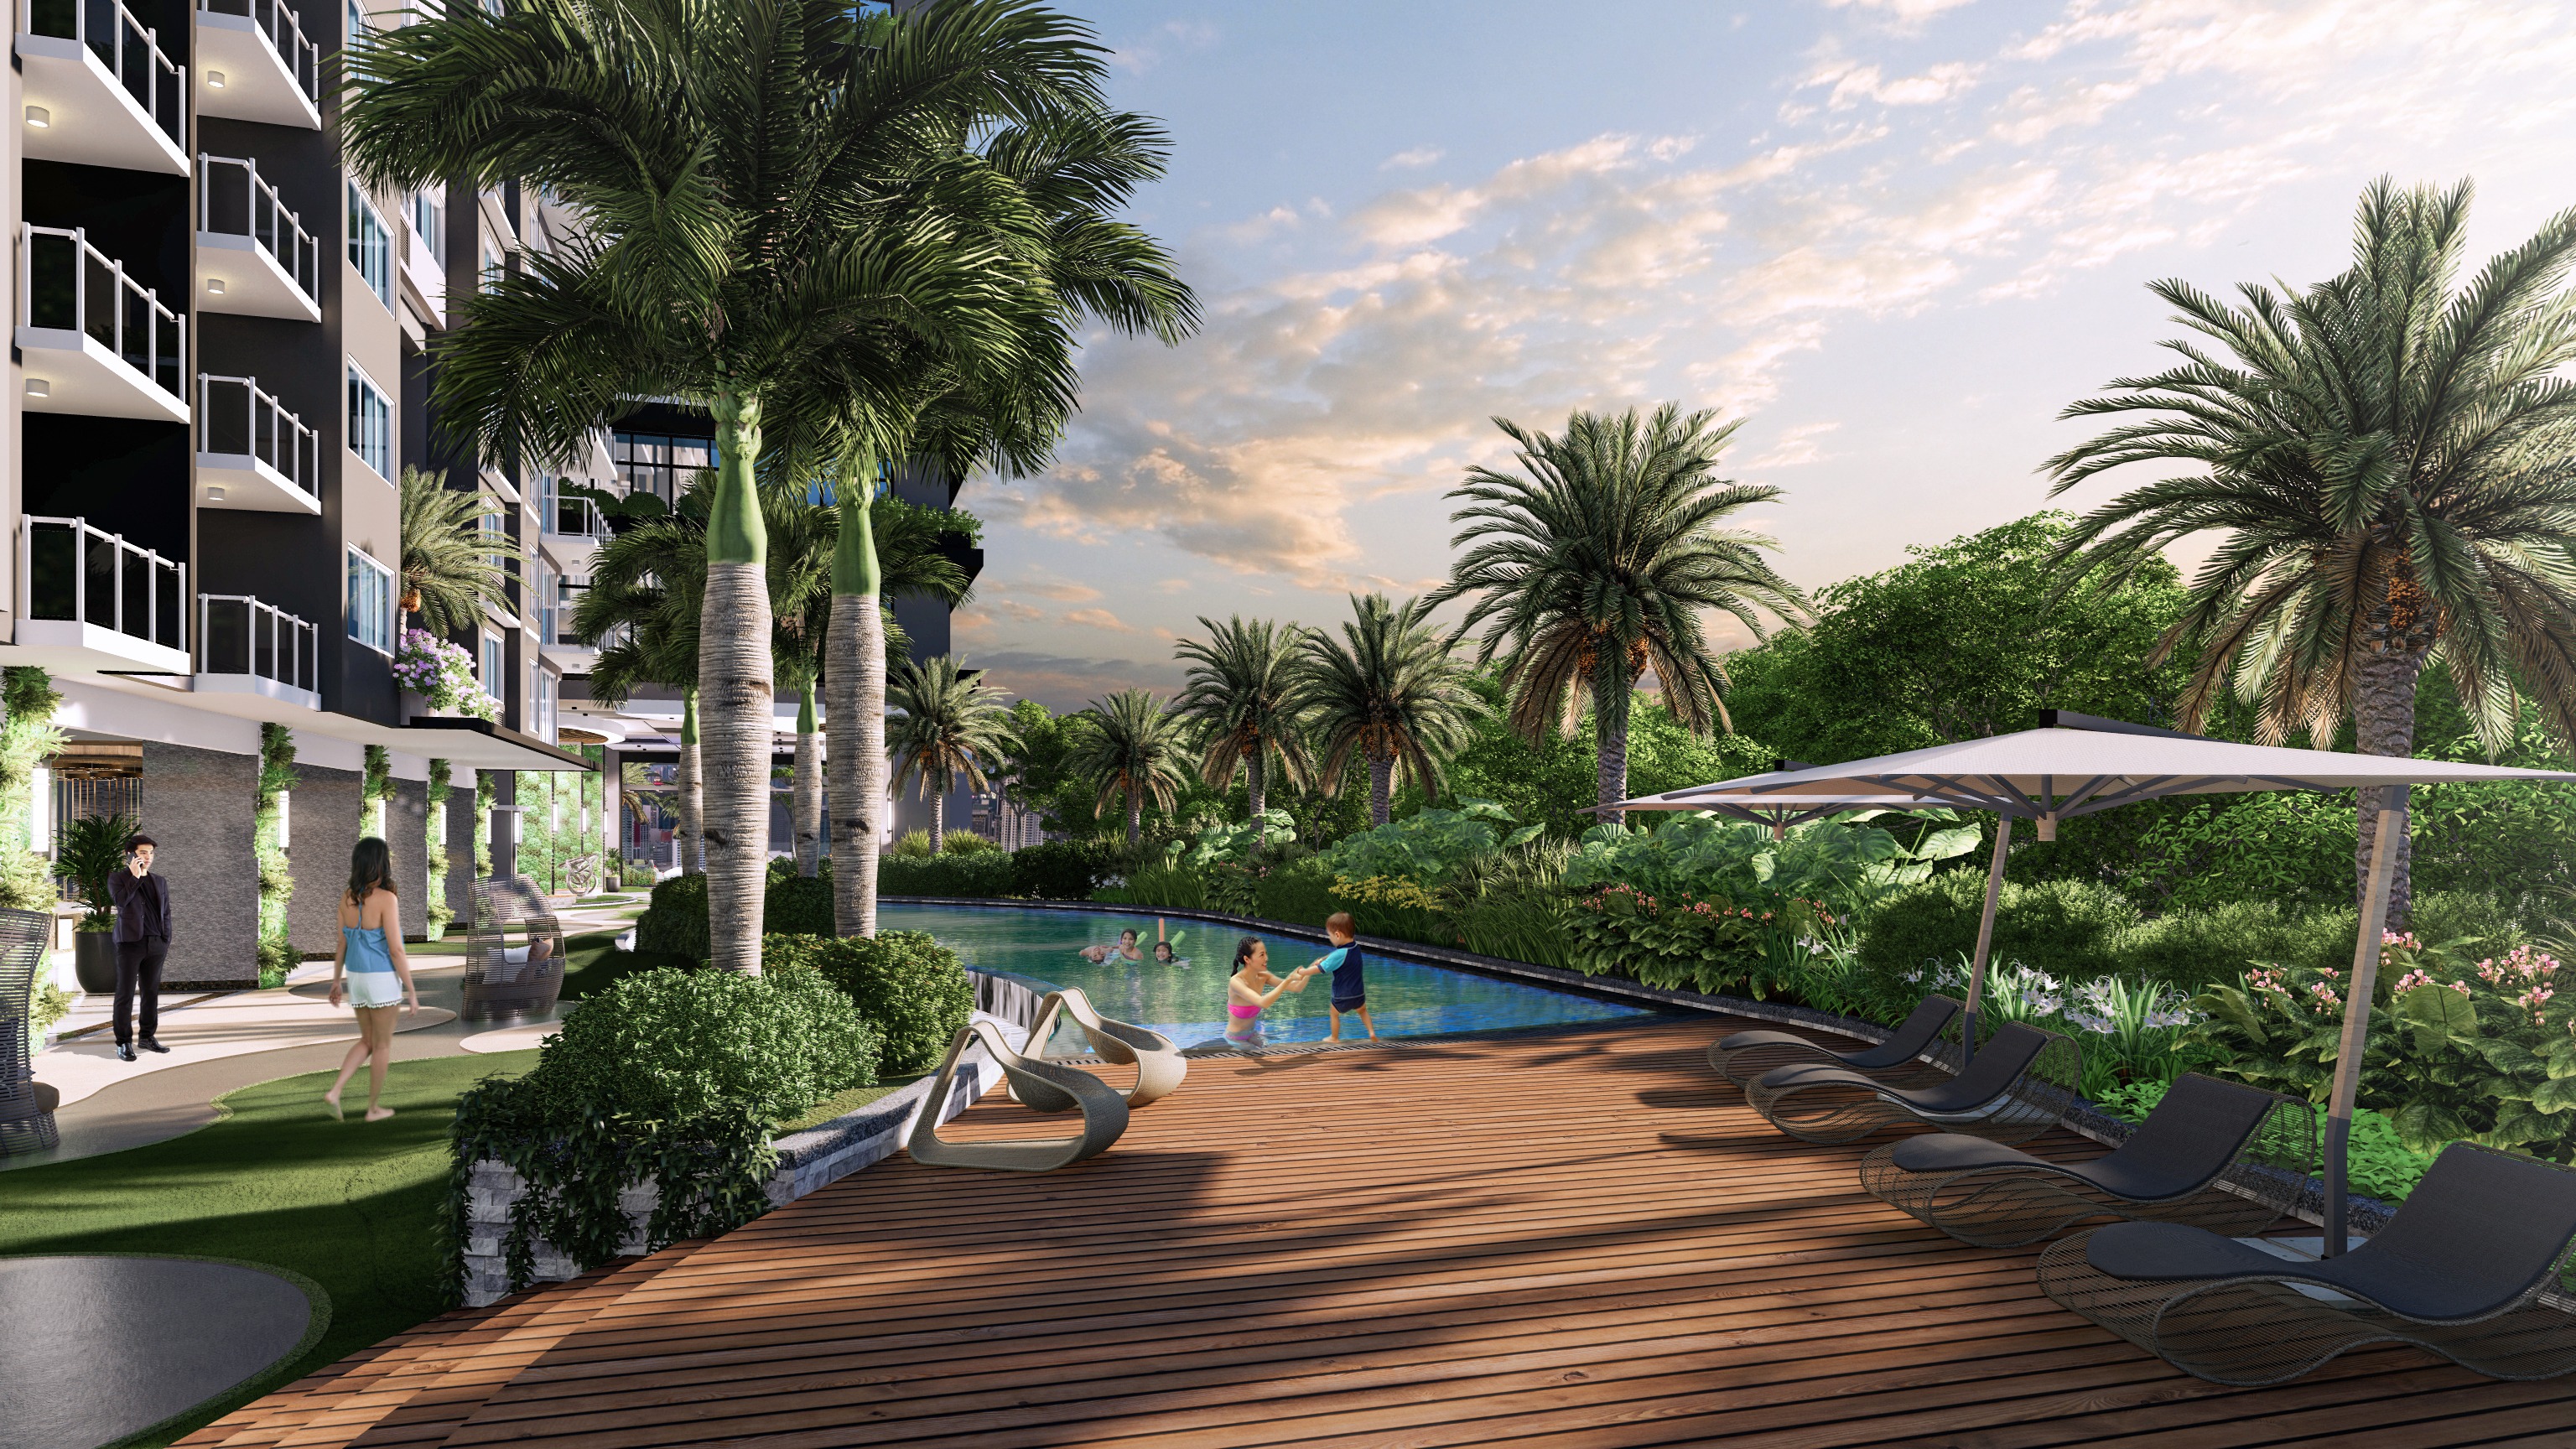 Digital render of a tropical-inspired condo unit with people roaming around